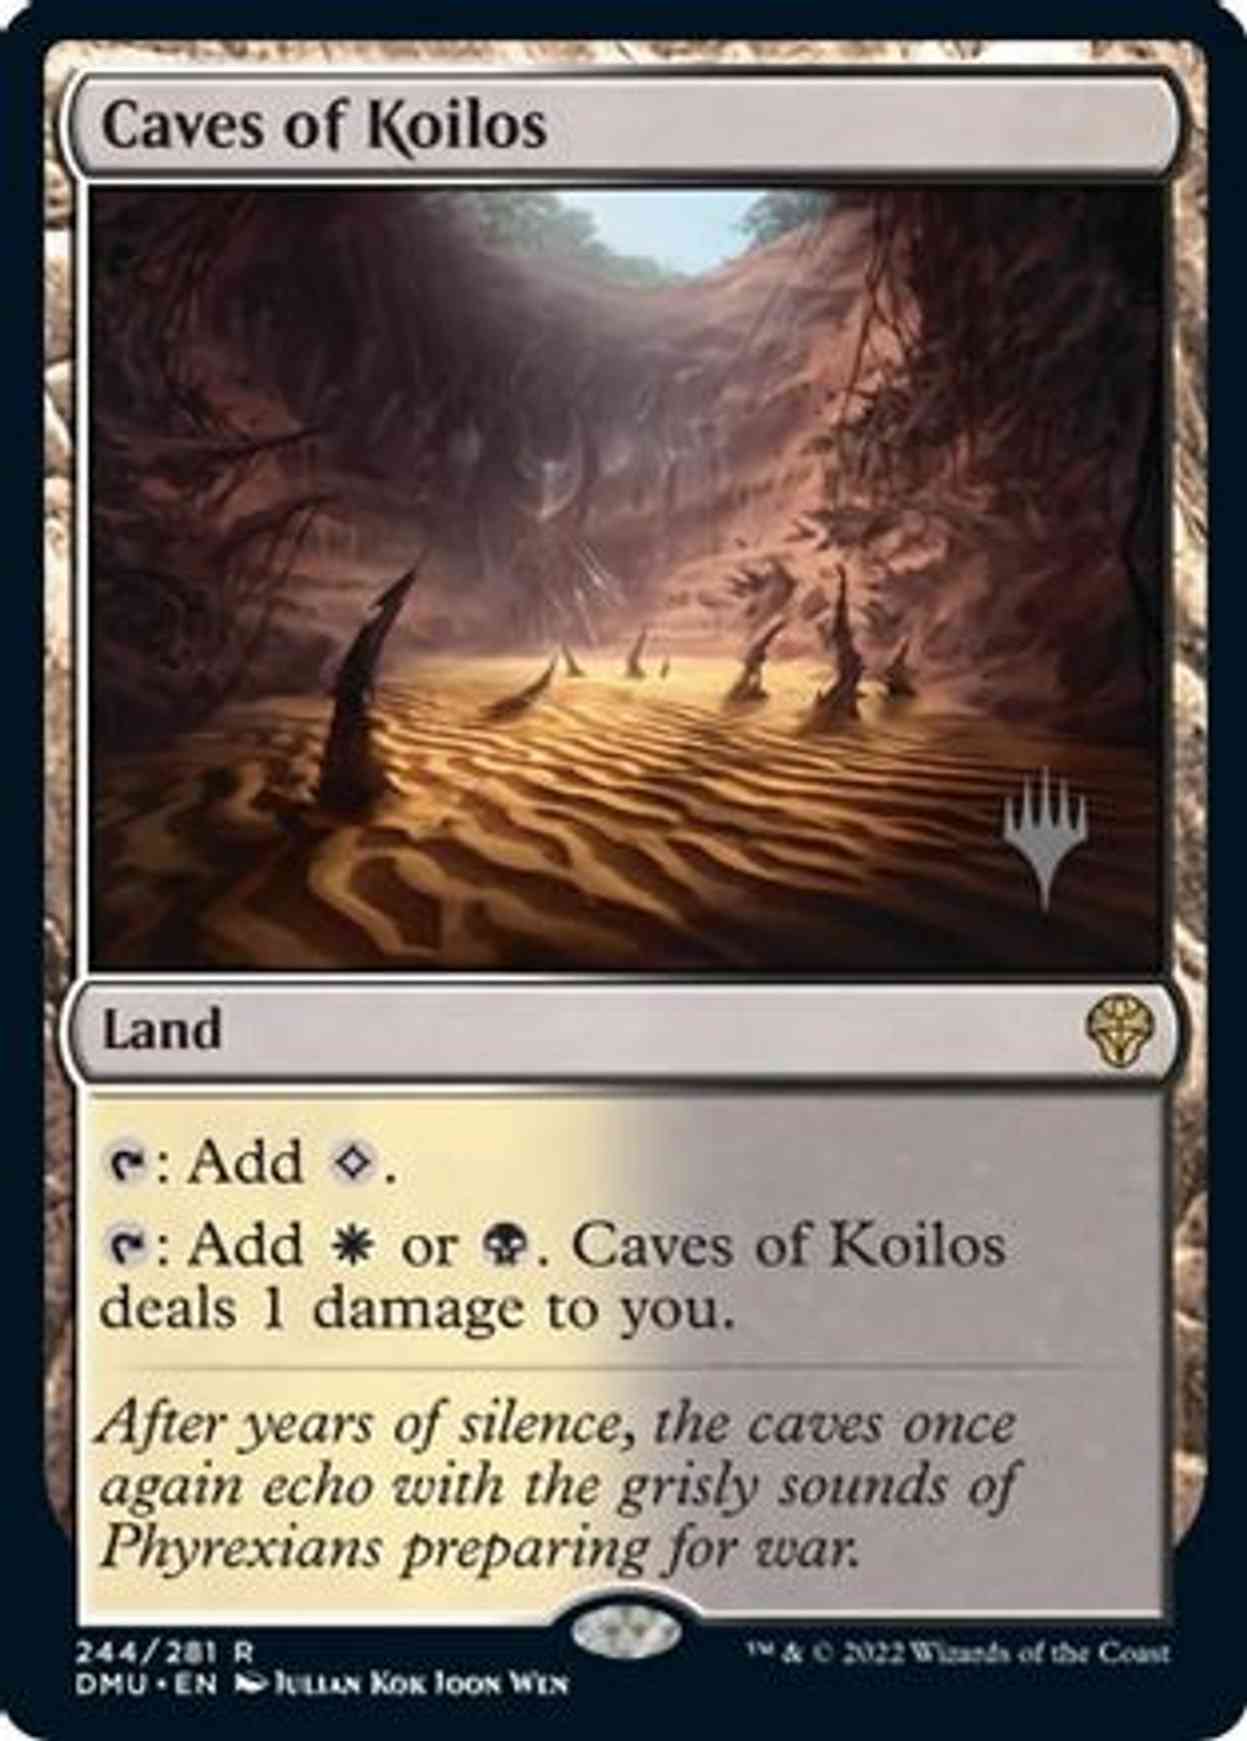 Caves of Koilos magic card front